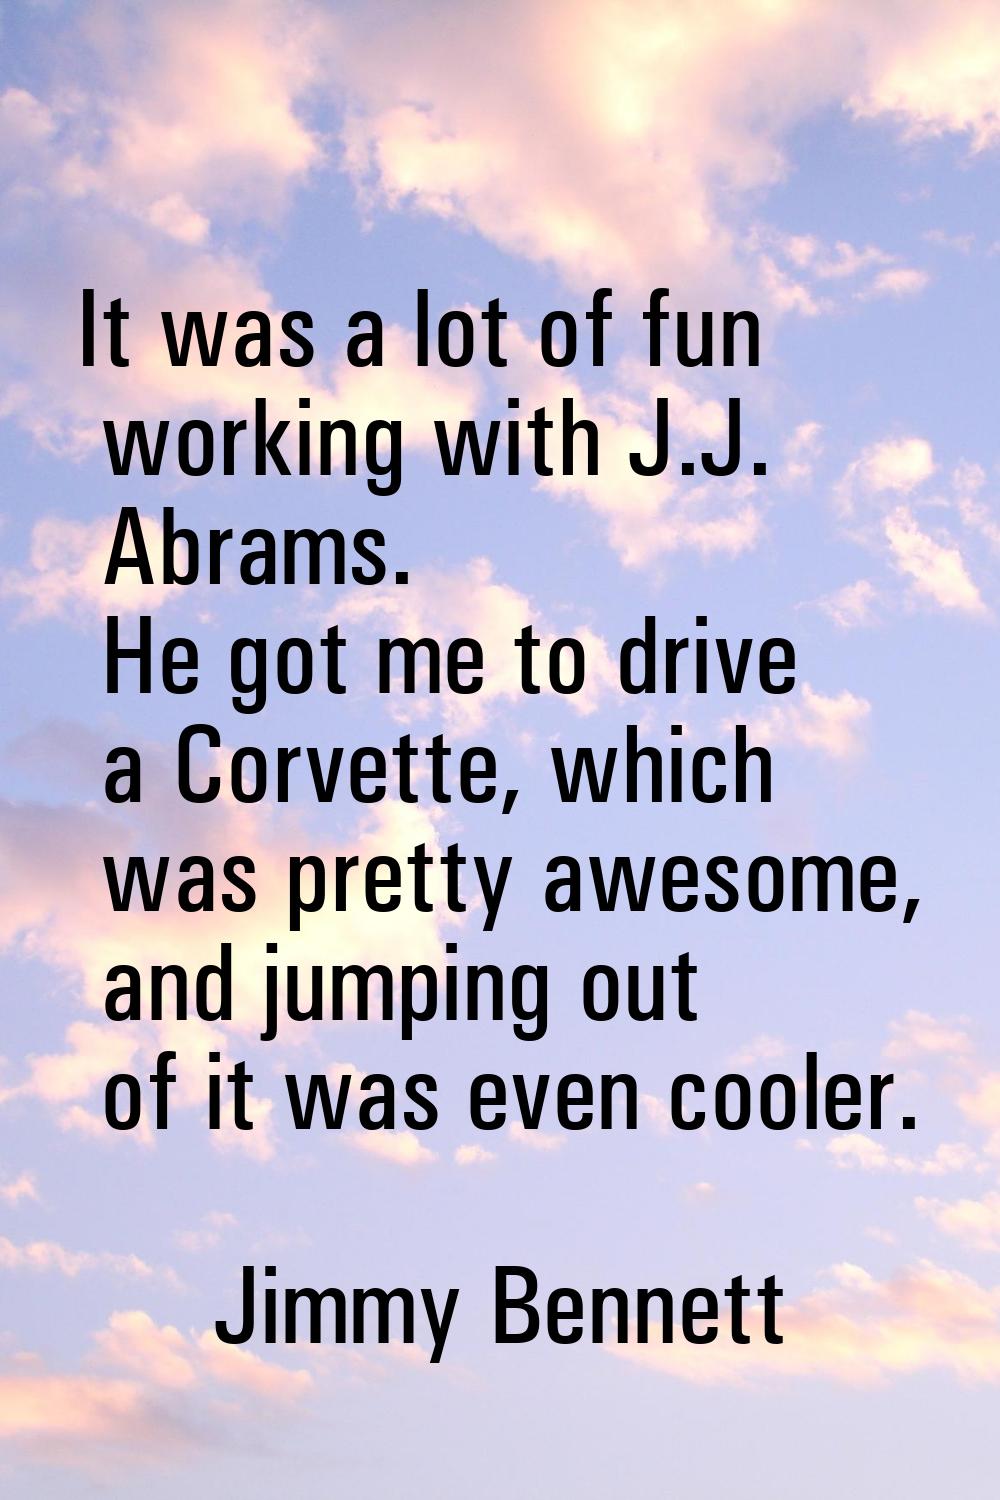 It was a lot of fun working with J.J. Abrams. He got me to drive a Corvette, which was pretty aweso